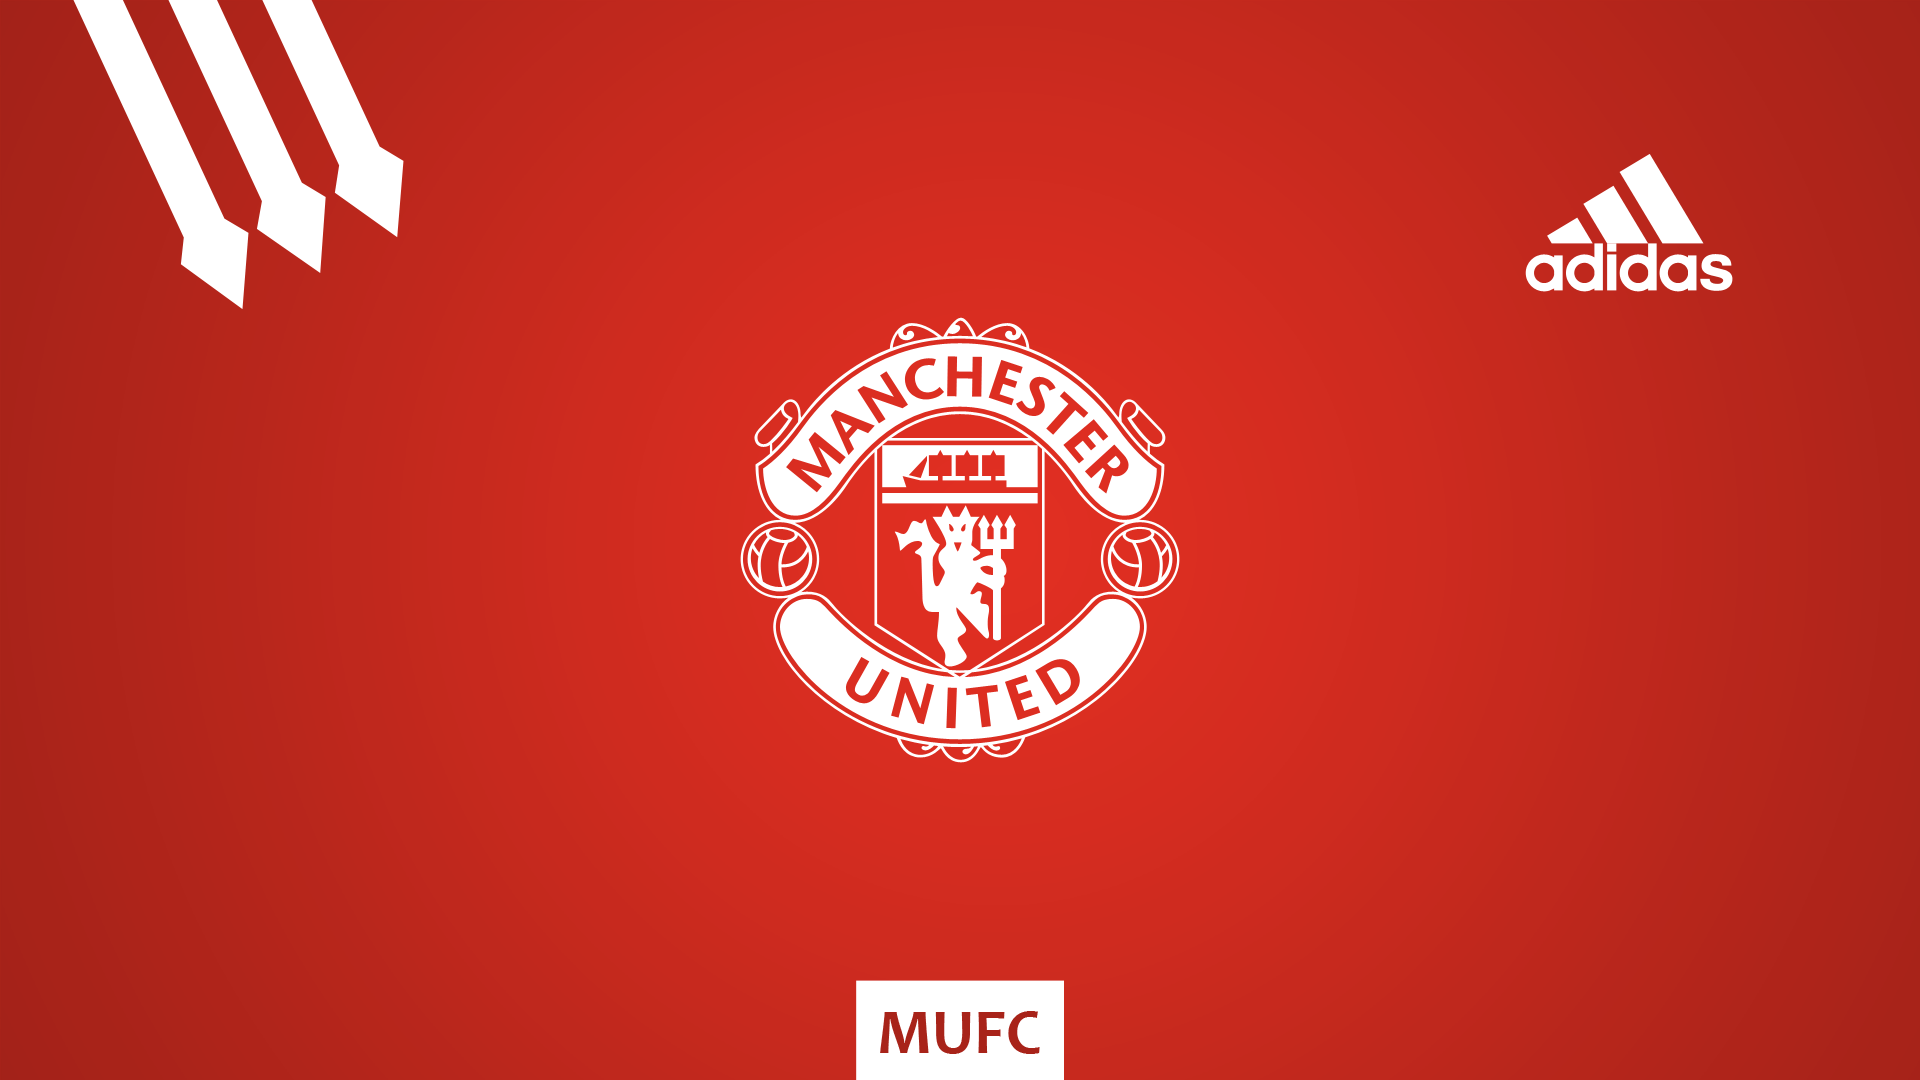 Manchester United Manchester Football Logo Simple Background Red Devil Adidas 1920x1080